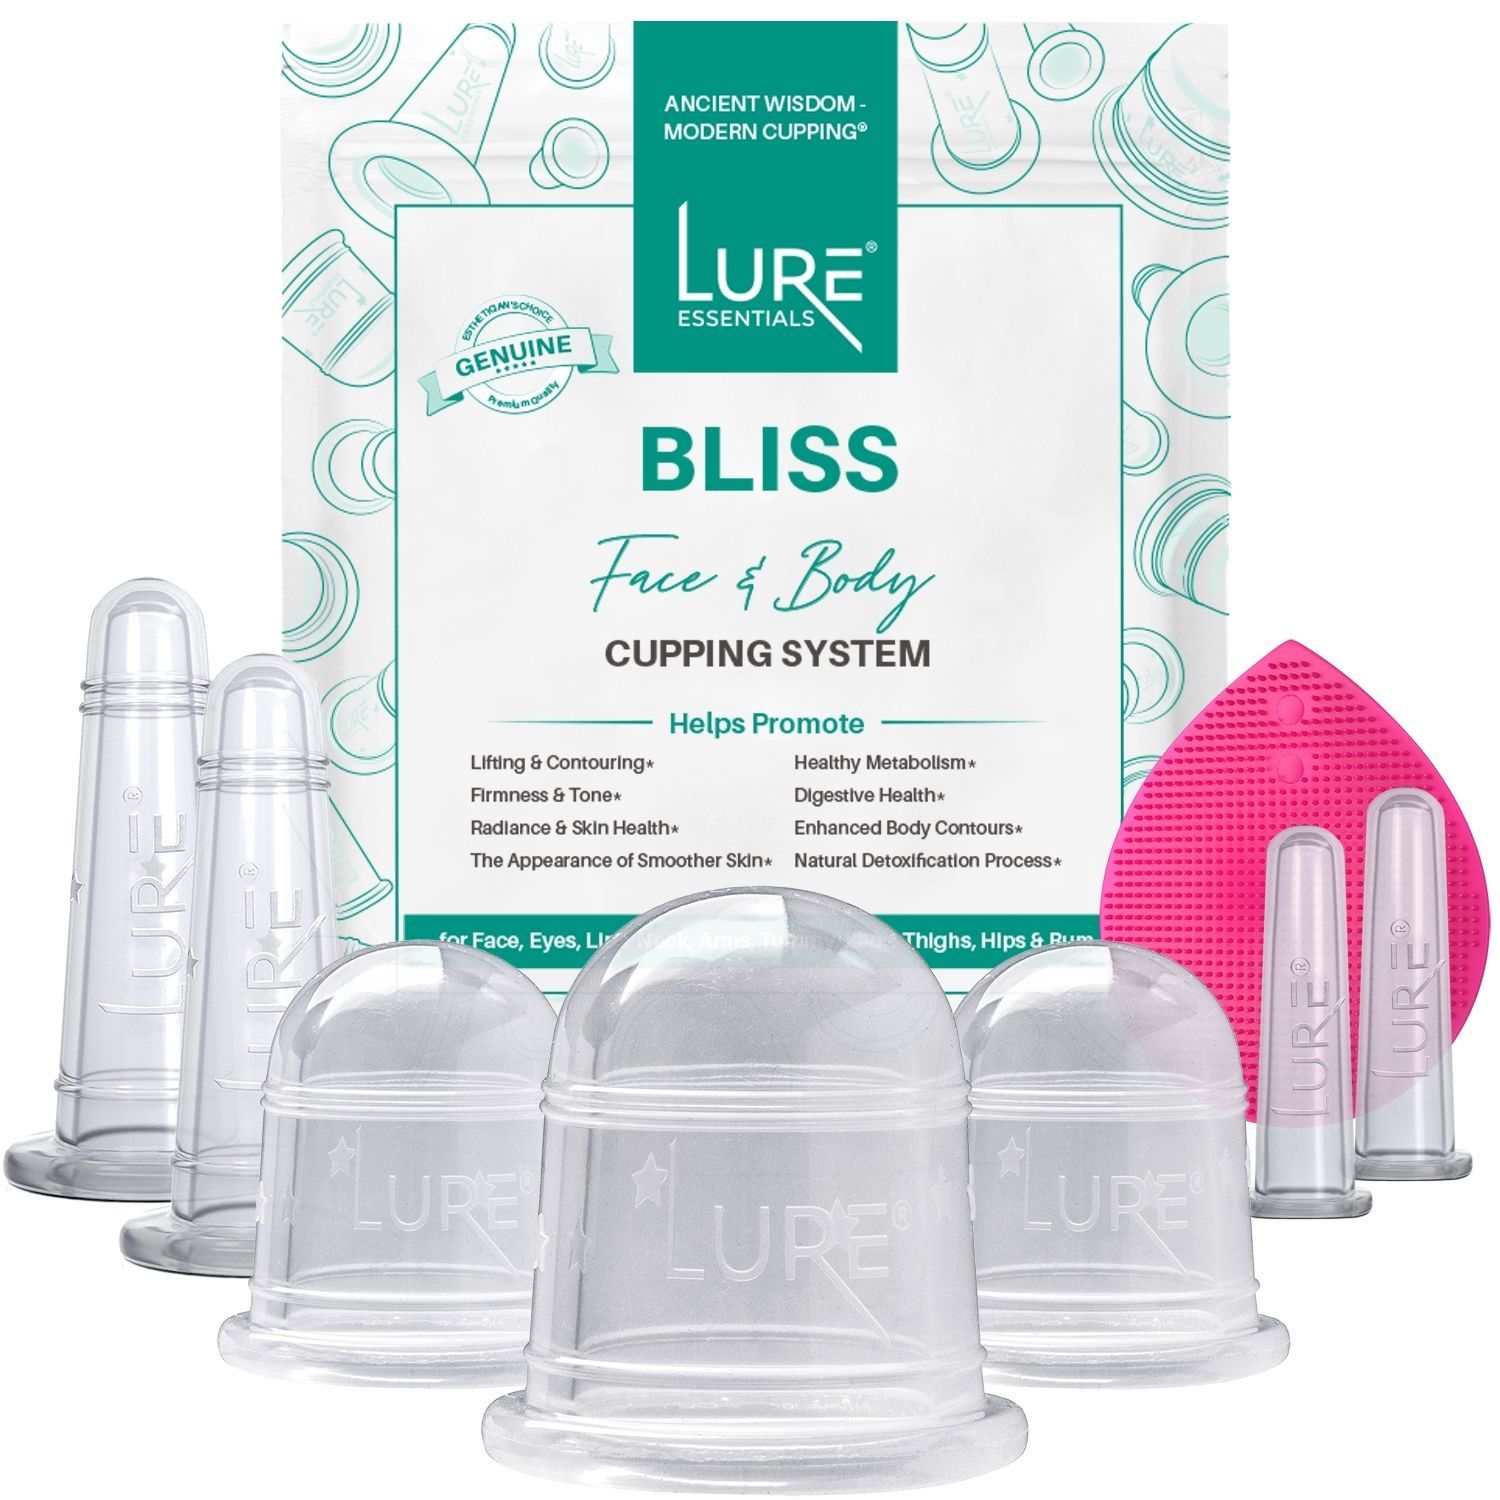 BLISS Face and Body Cupping Set